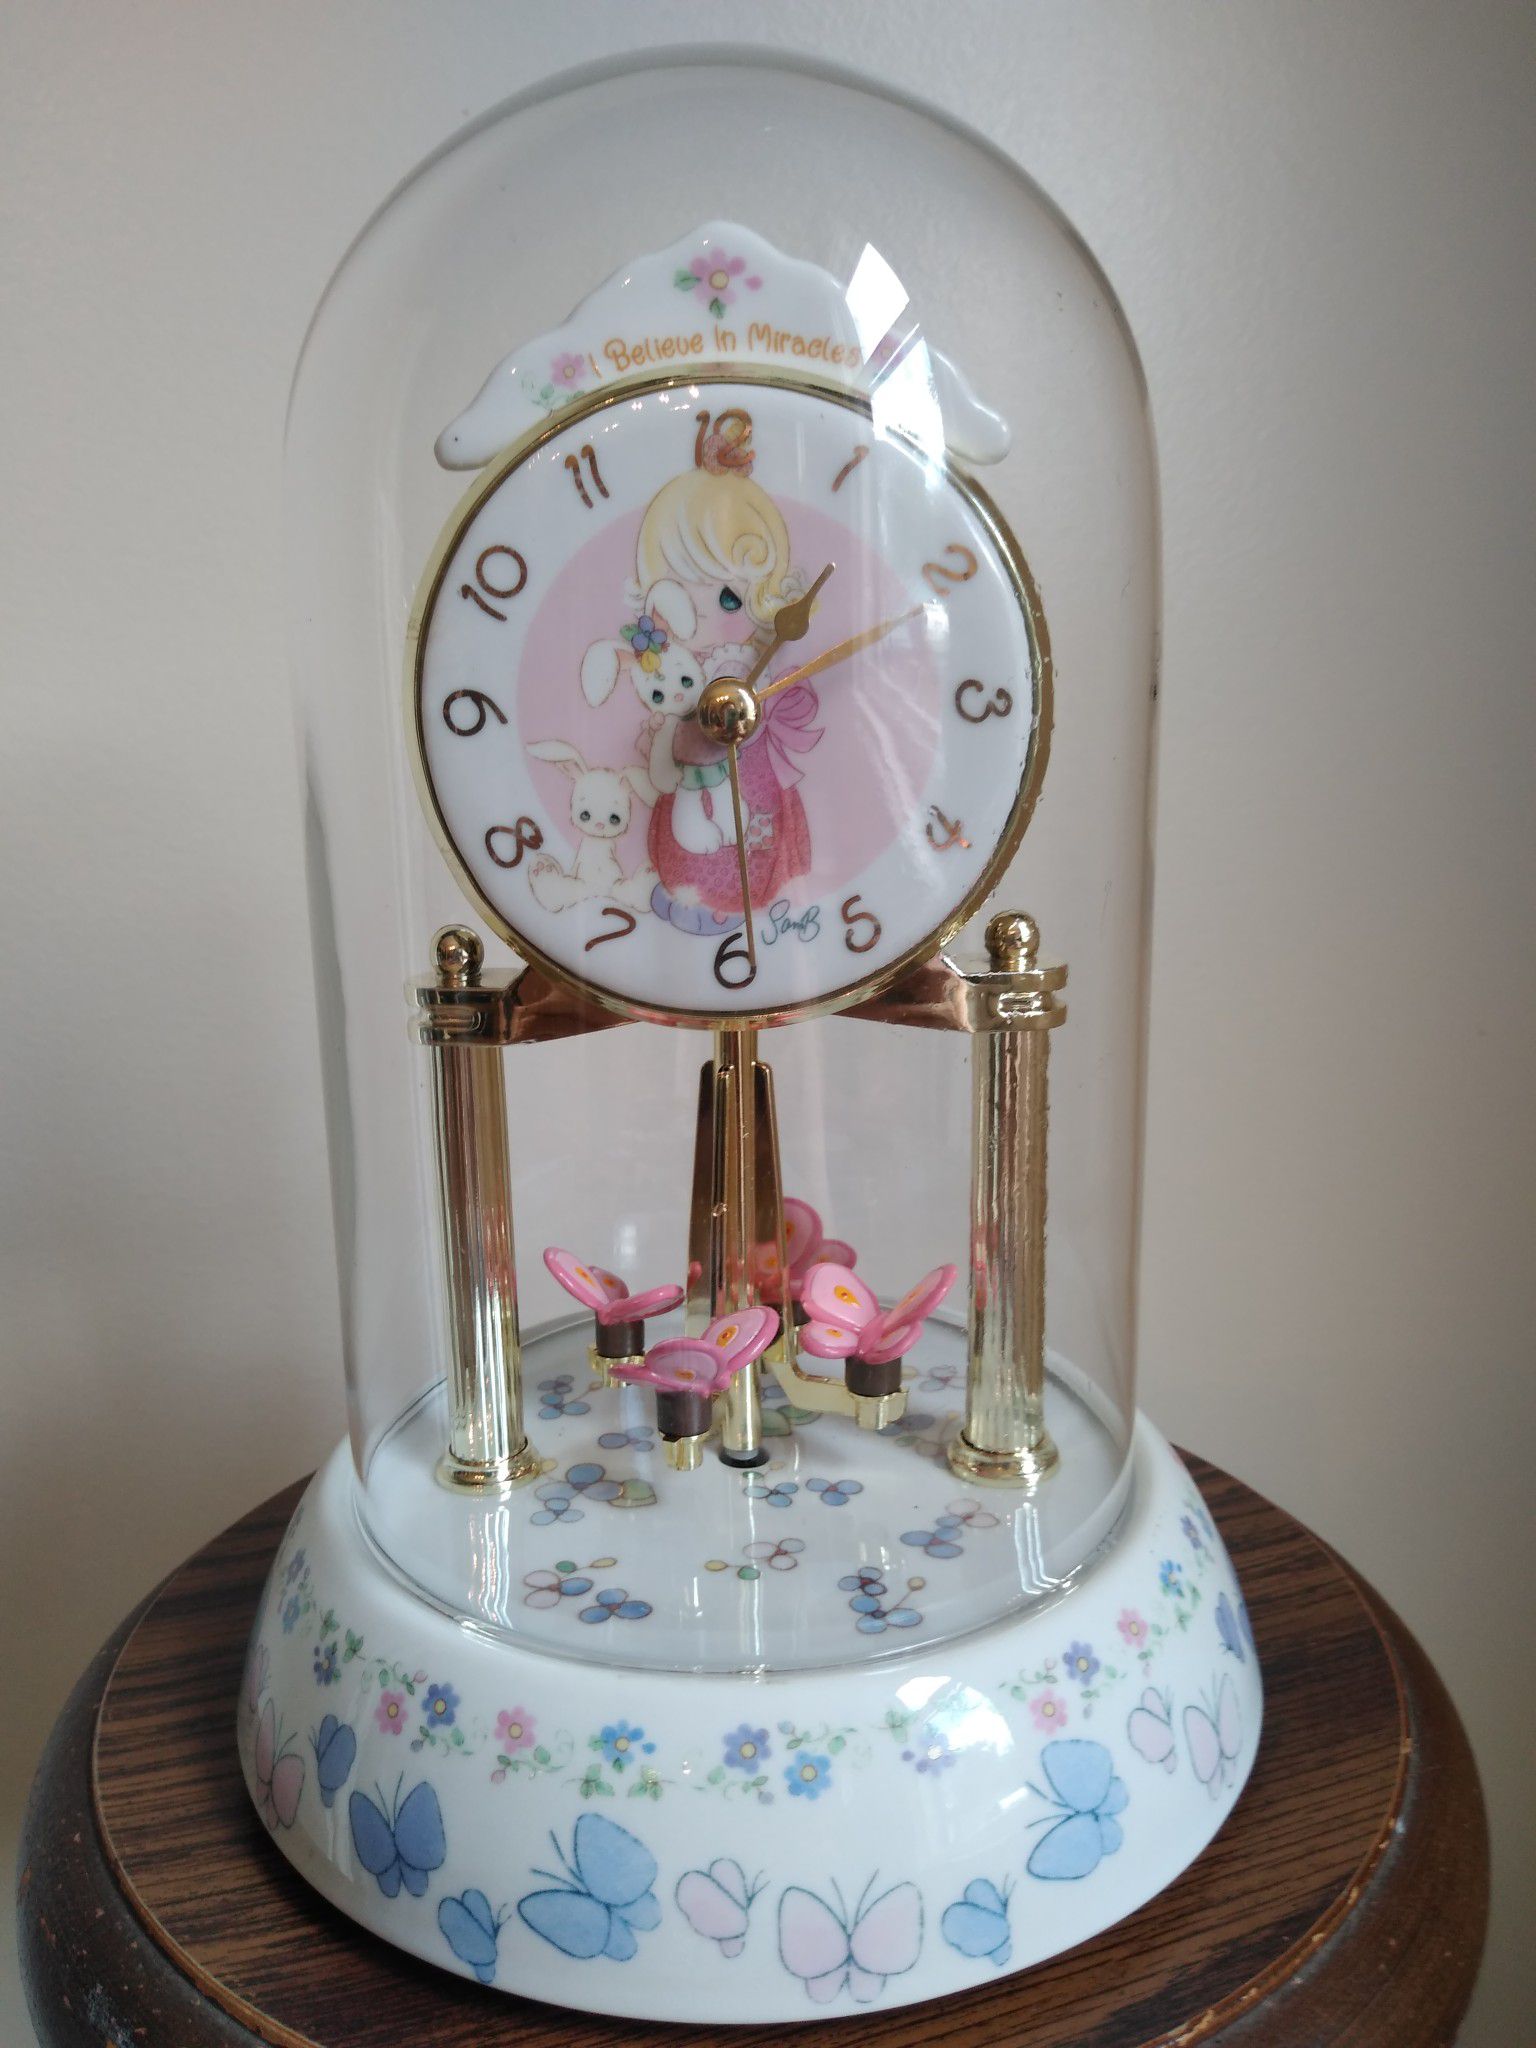 Precious Moments Anniversary Clock - I Believe in Miracles